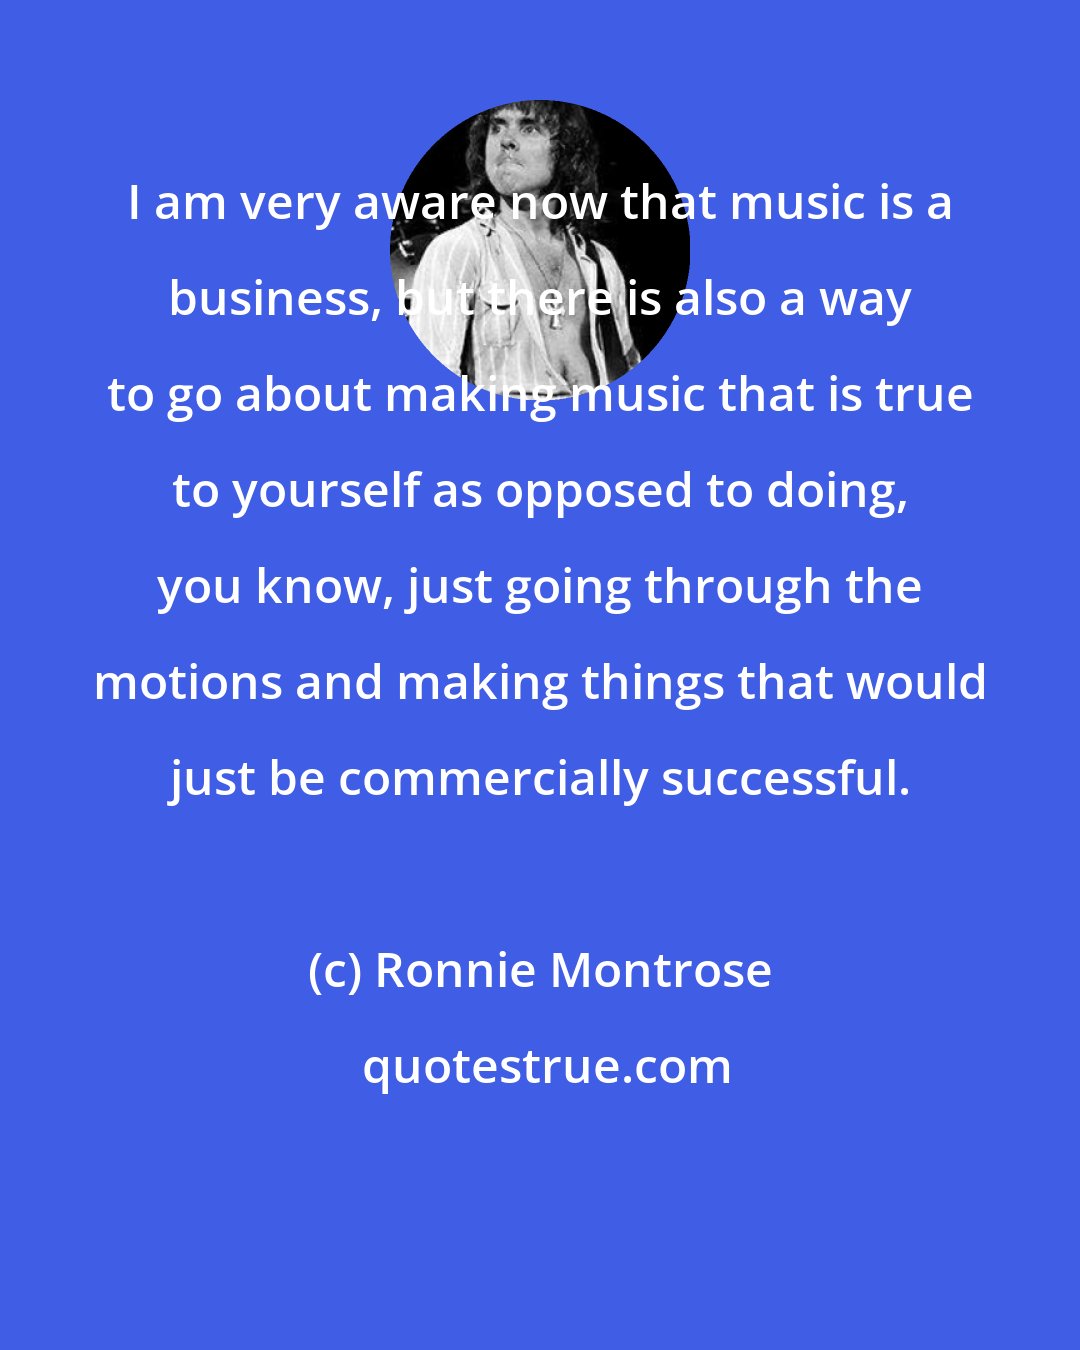 Ronnie Montrose: I am very aware now that music is a business, but there is also a way to go about making music that is true to yourself as opposed to doing, you know, just going through the motions and making things that would just be commercially successful.